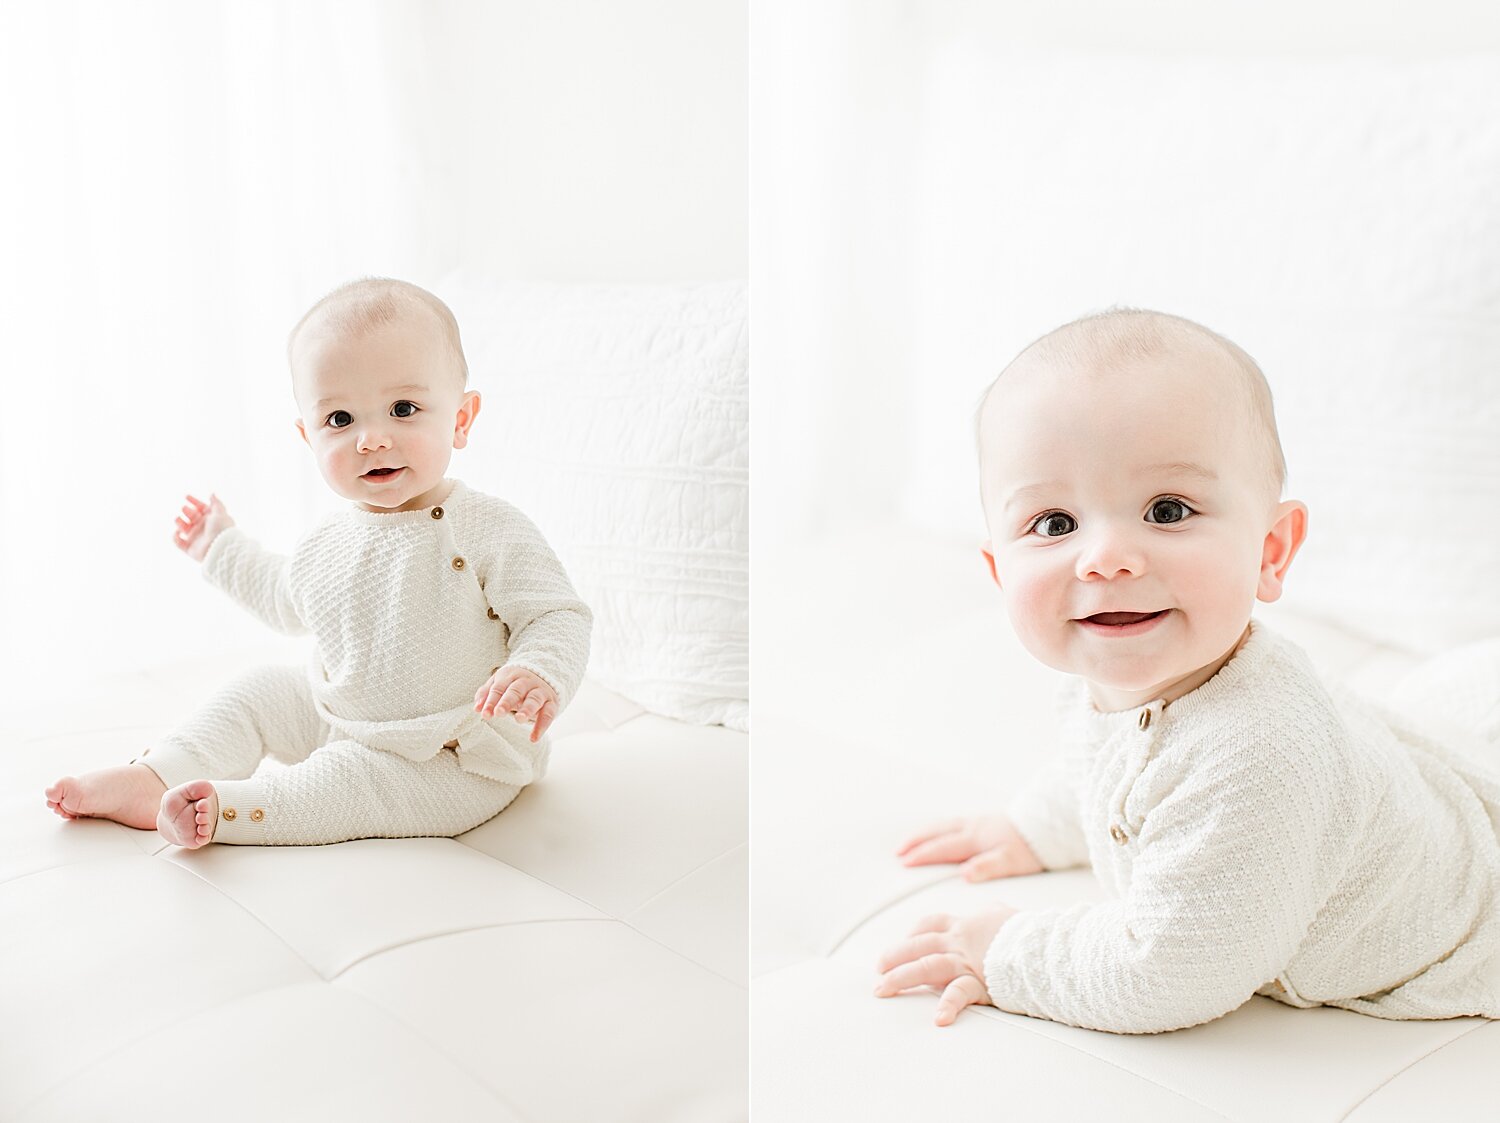 Sitter milestone session in studio in Fairfield County. Photos by Kristin Wood Photography.